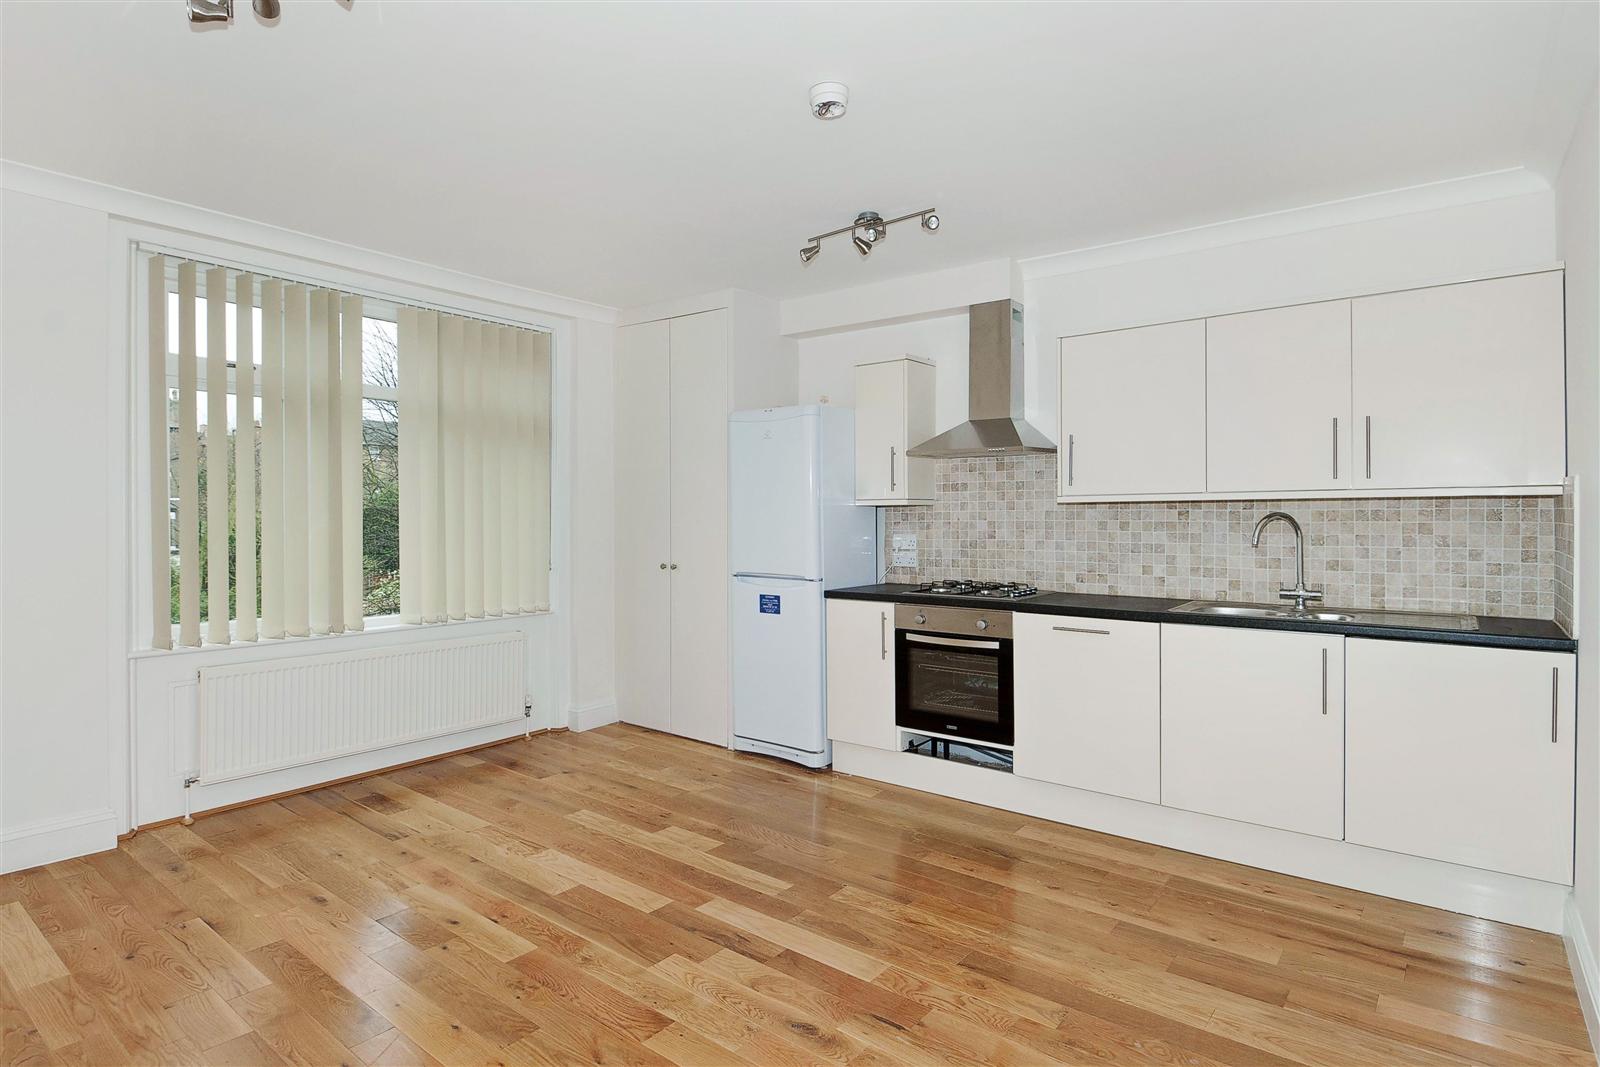 3 bed flat to rent in Anson Road - Property Image 1